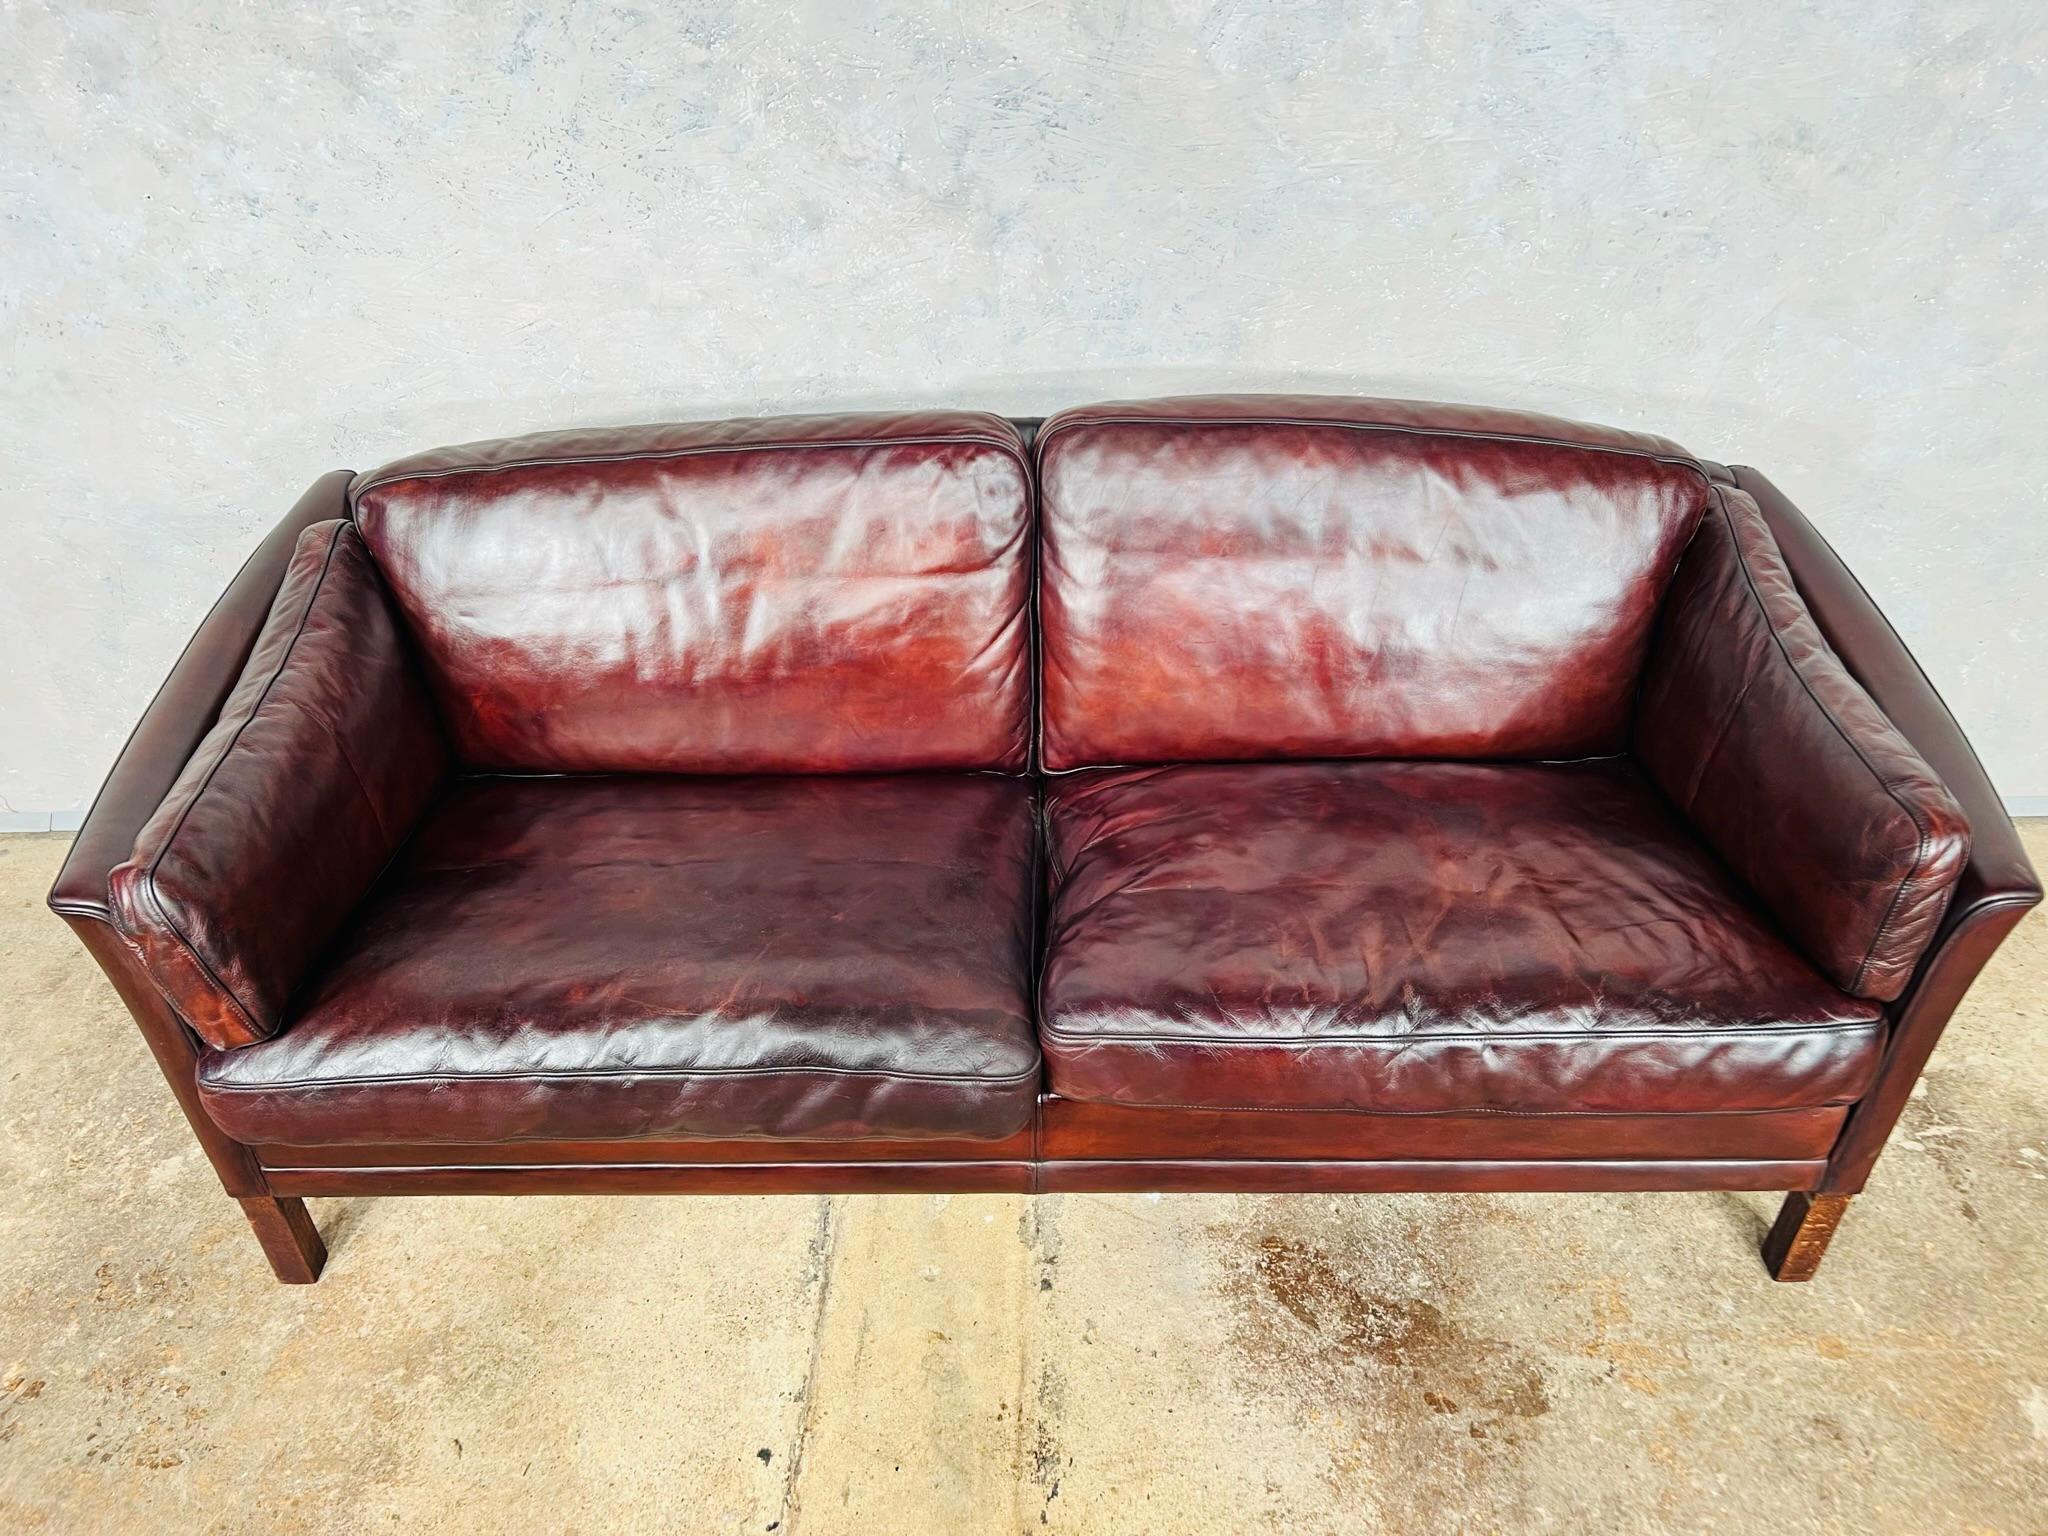 A Stylish Danish 1970s Sofa designed by Mogens Hansen, great design with beautiful lines, sits wonderfully. This is a 2.5 seater or a large two seater.

The sofa has a Stunning hand dyed deep chestnut colour, the leather has a great patina and